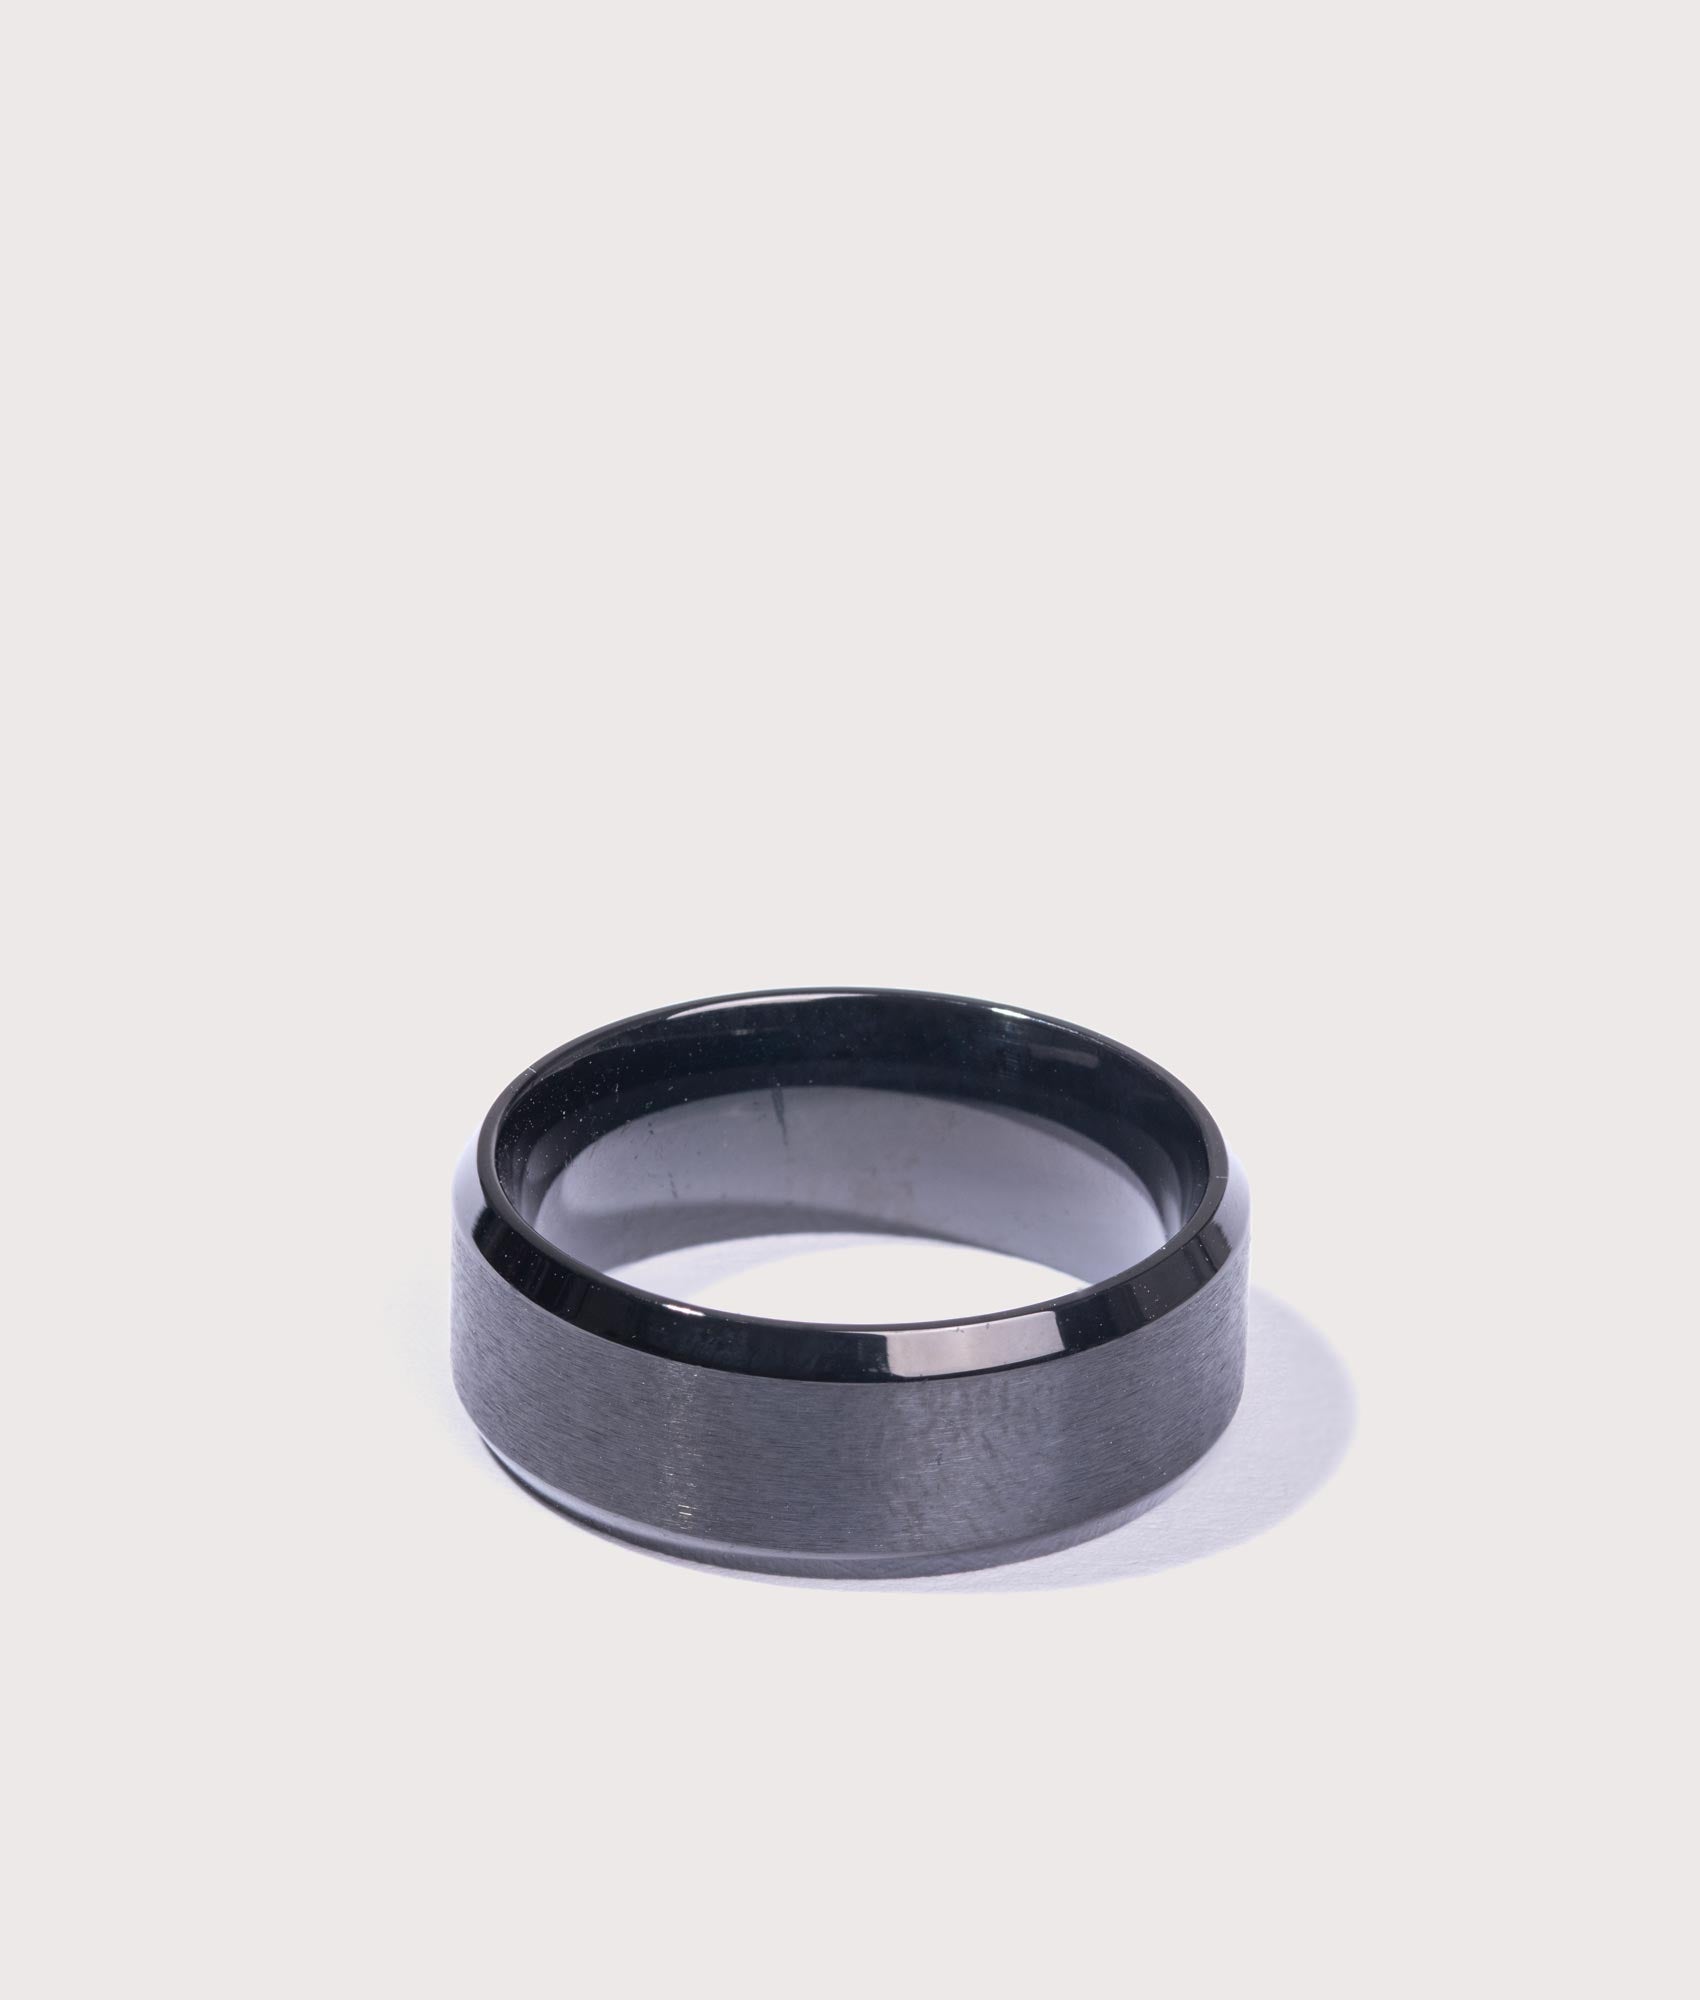 Mysterious Jeweller Mens Stainless Steel Band Ring - Colour: Black - Size: S/9